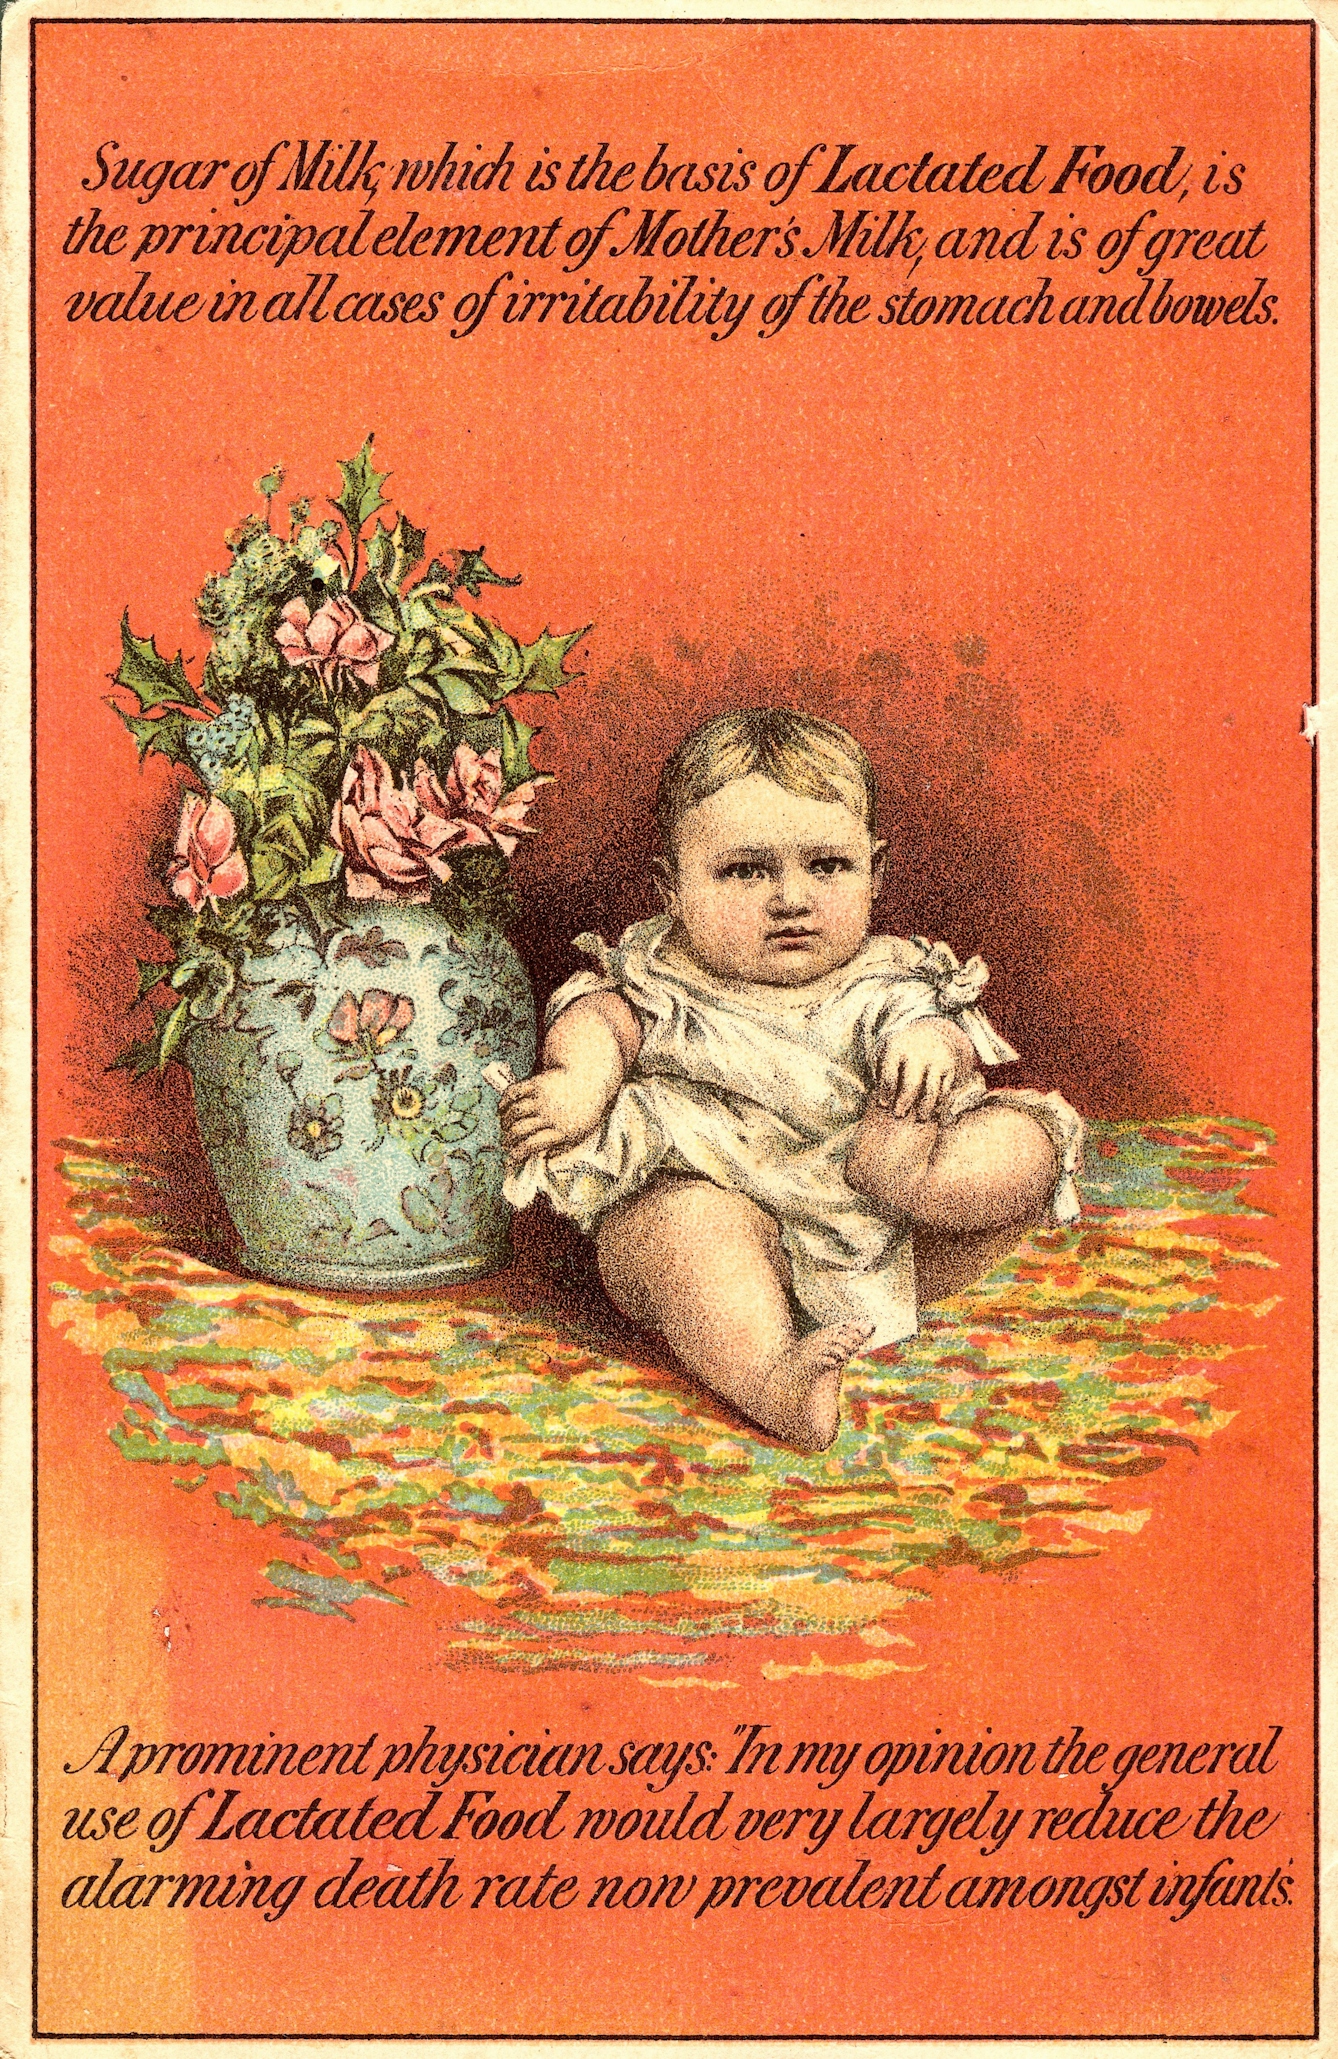 Victorian card with an orange background depicting a baby next to a vase of flowers. Text reads: Sugar of Milk, which is the basis of Lactated Food, is the principal element of Mother's Milk, and is of great value in all cases of irritability of the stomach and bowels. A prominent physician says: 'In my opinion the general use of Lactated Food would very largely reduce the alarming death rate now prevalent amongst infants.'